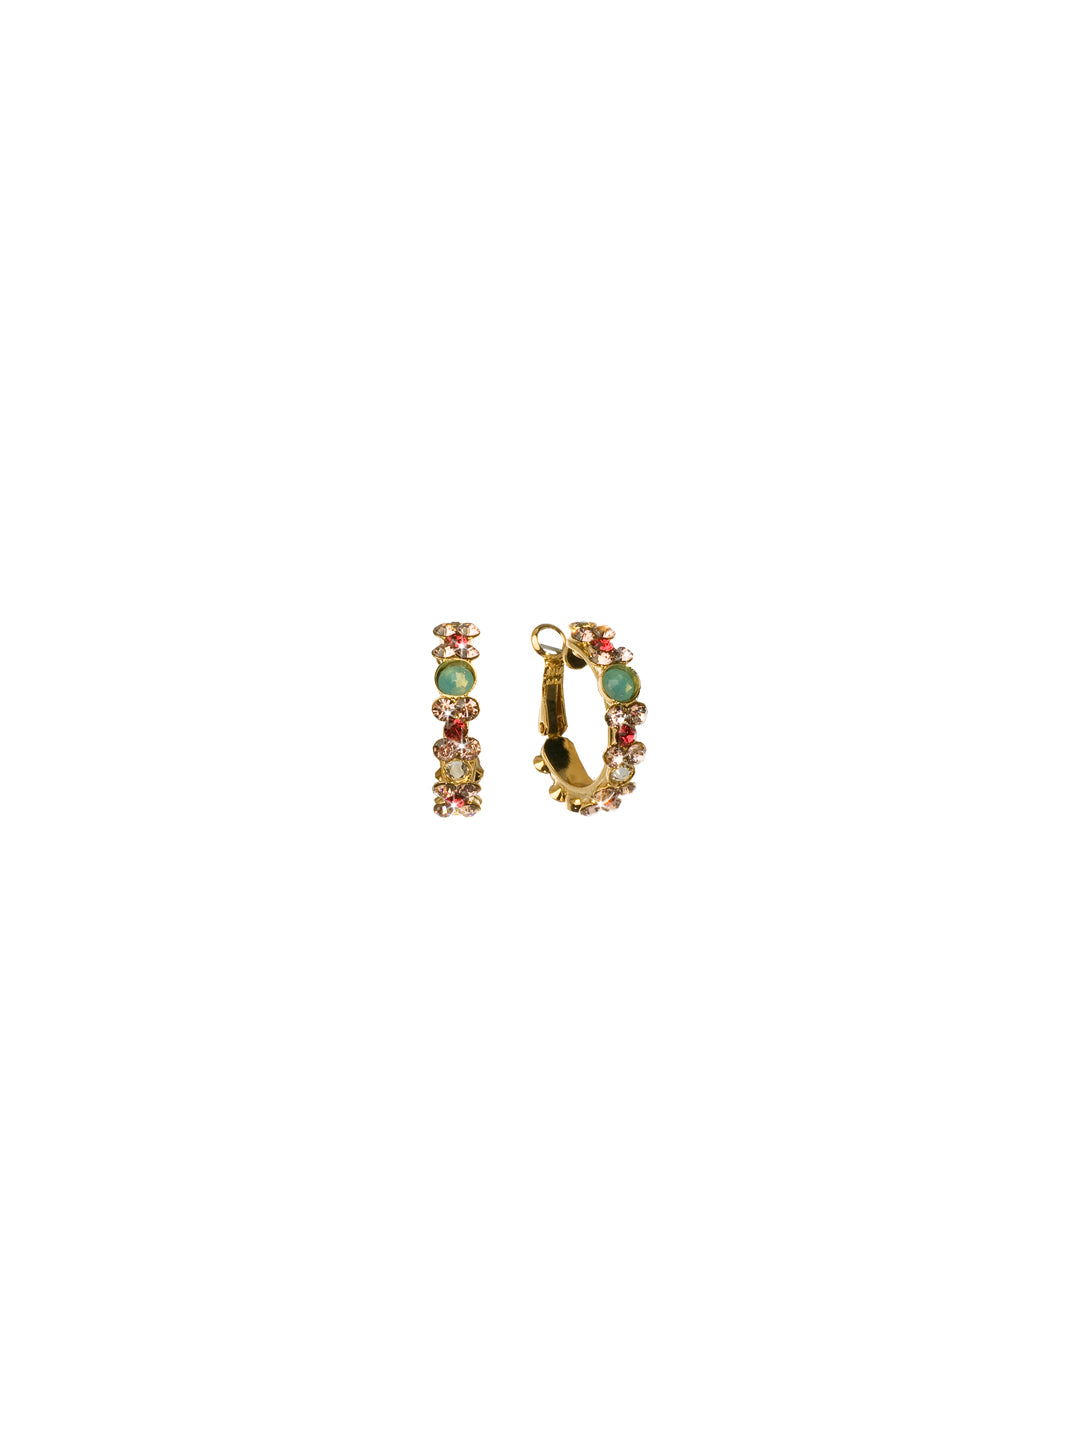 Floral Hoop Earrings - EBP15BGCOR - <p>Intricate design, infused with gorgeous shine. A motif of floral clusters is featured here on a small, delicate hoop with a hinged post backing. From Sorrelli's Coral Reef collection in our Bright Gold-tone finish.</p>